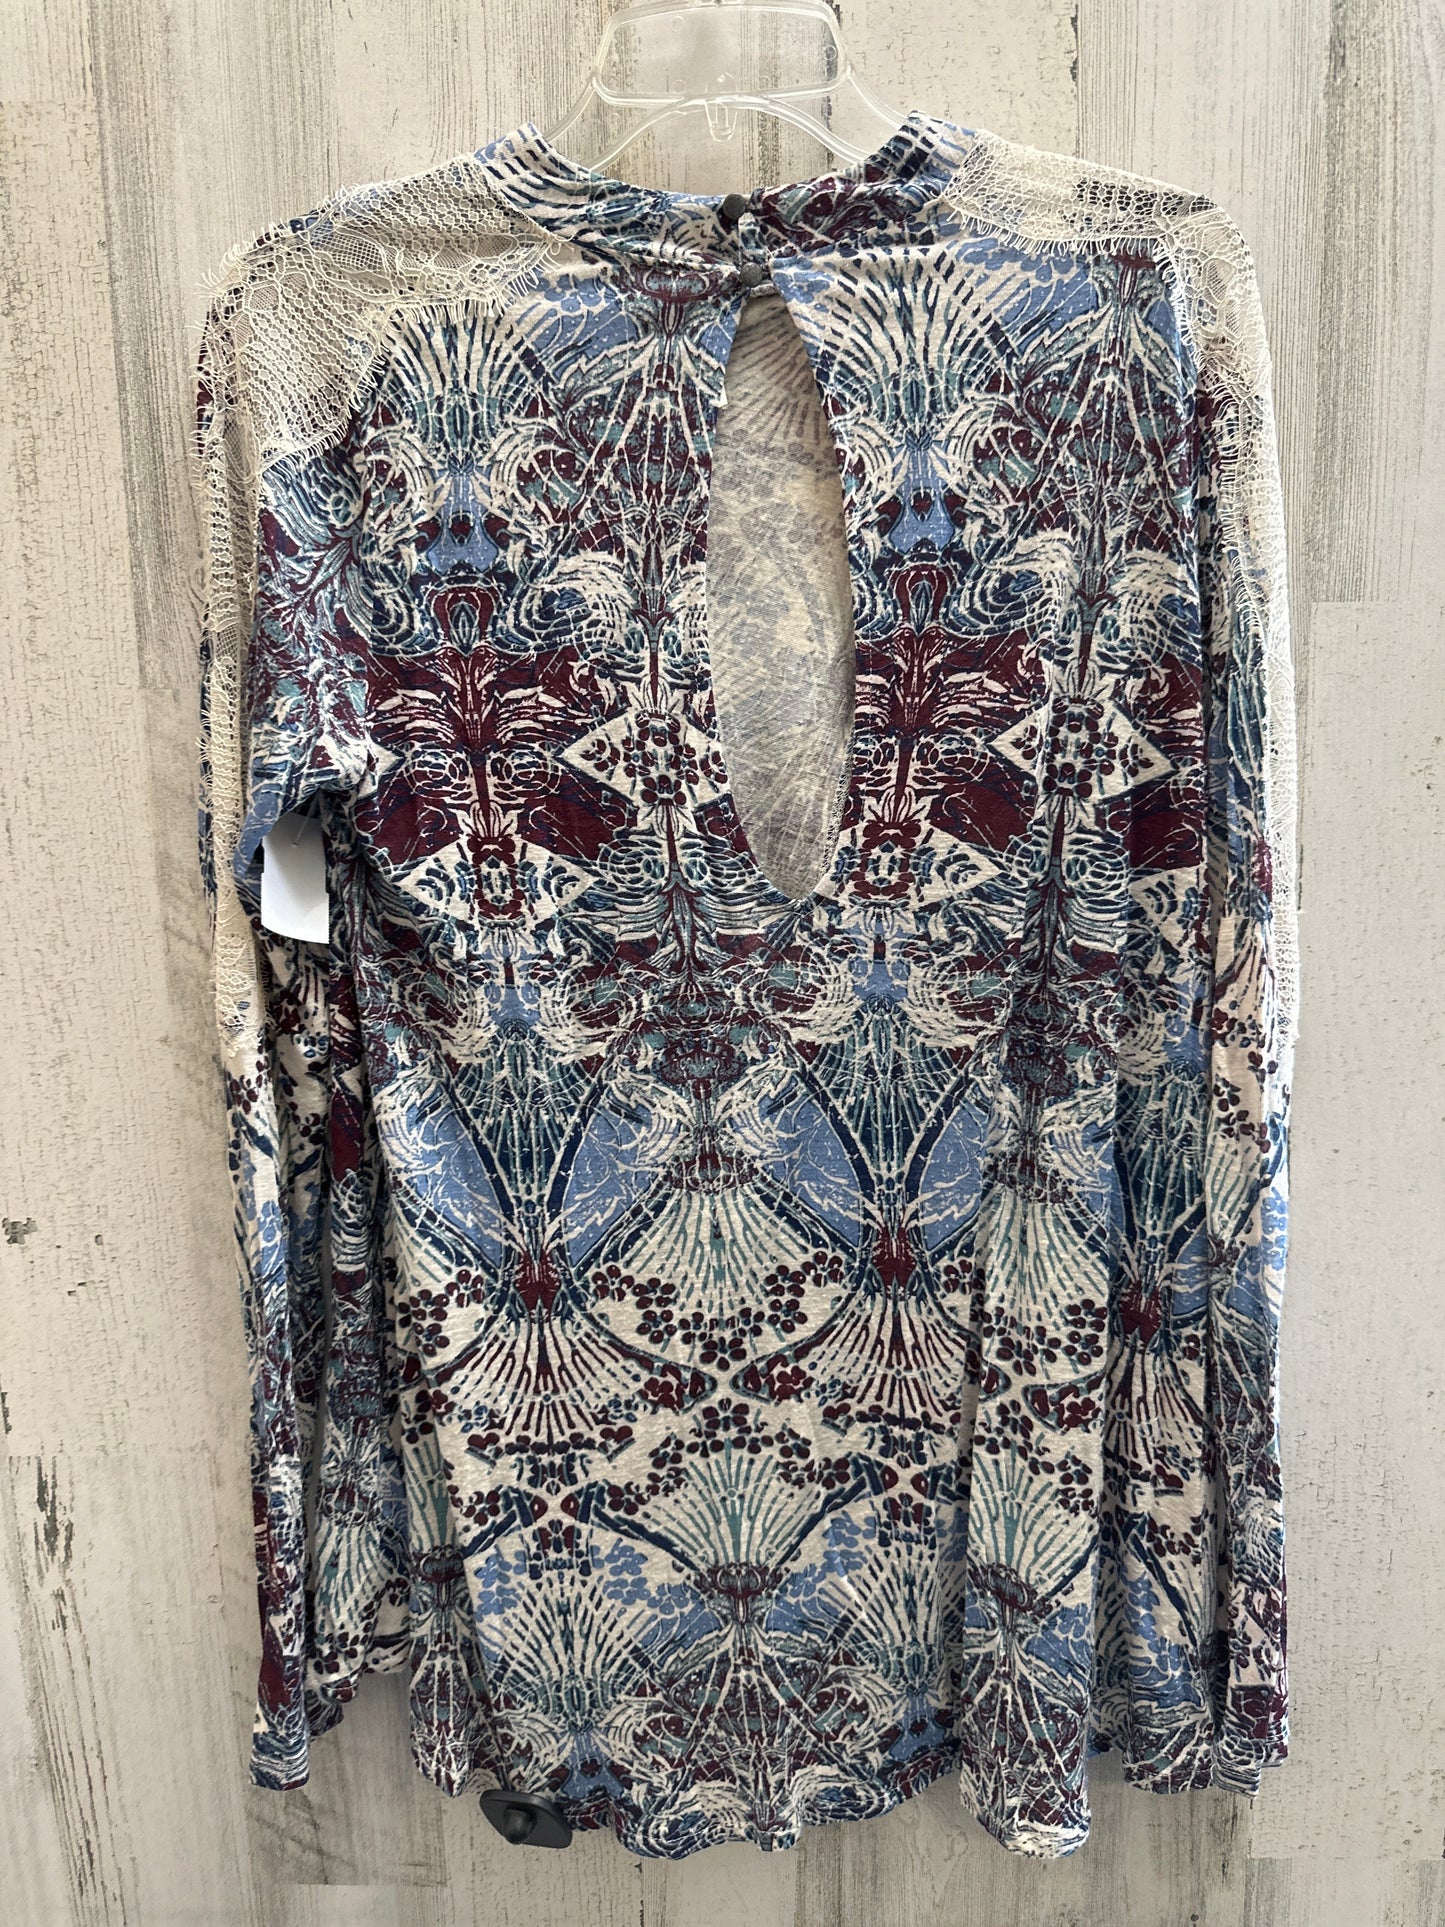 Multi-colored Top Long Sleeve Free People, Size M